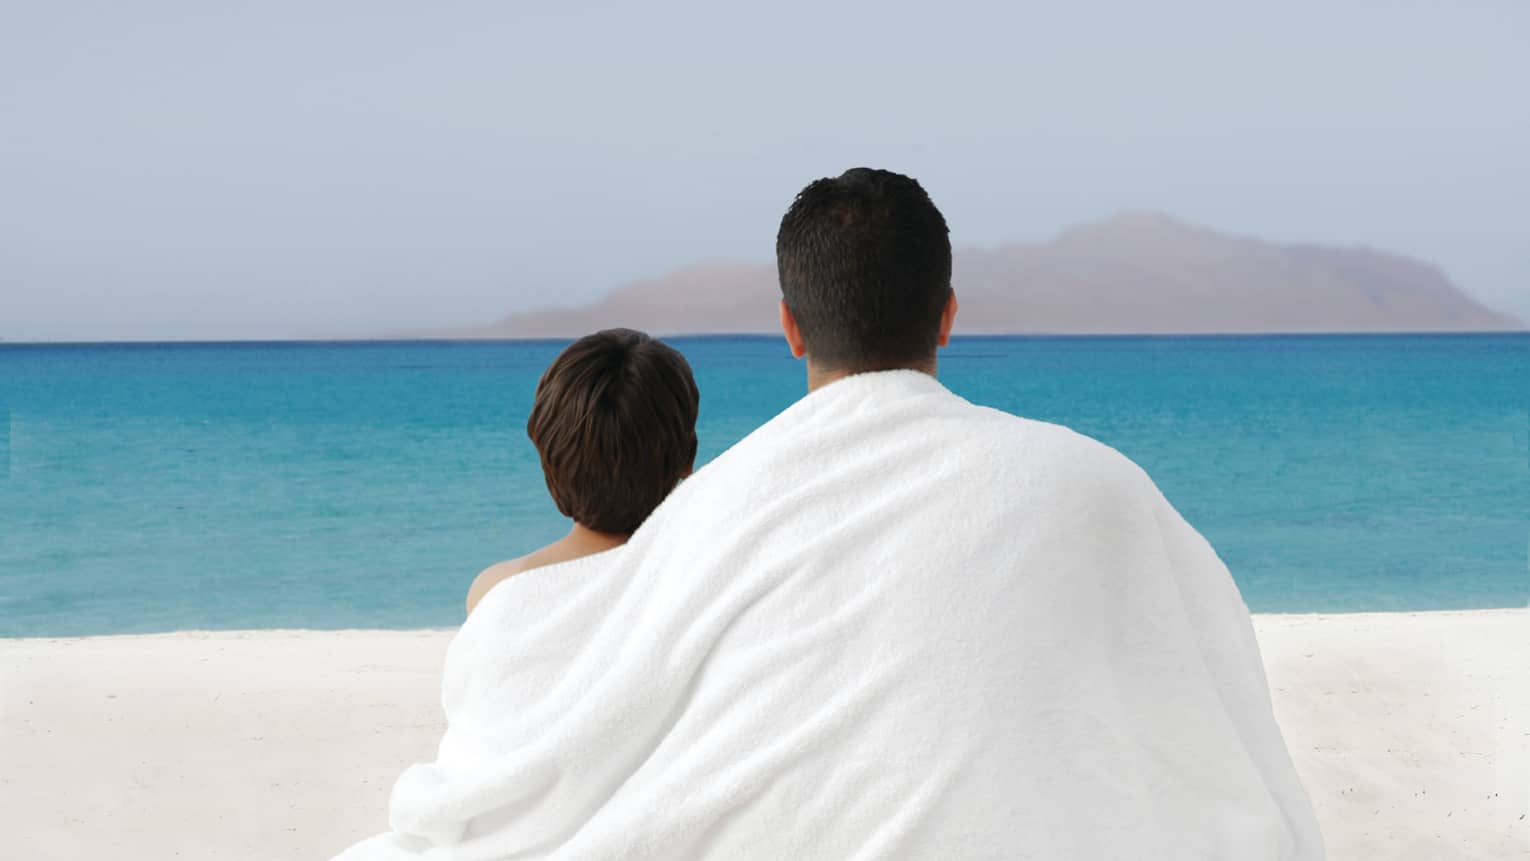 Father and son share white towel drapes across backs, look out at beach and sea